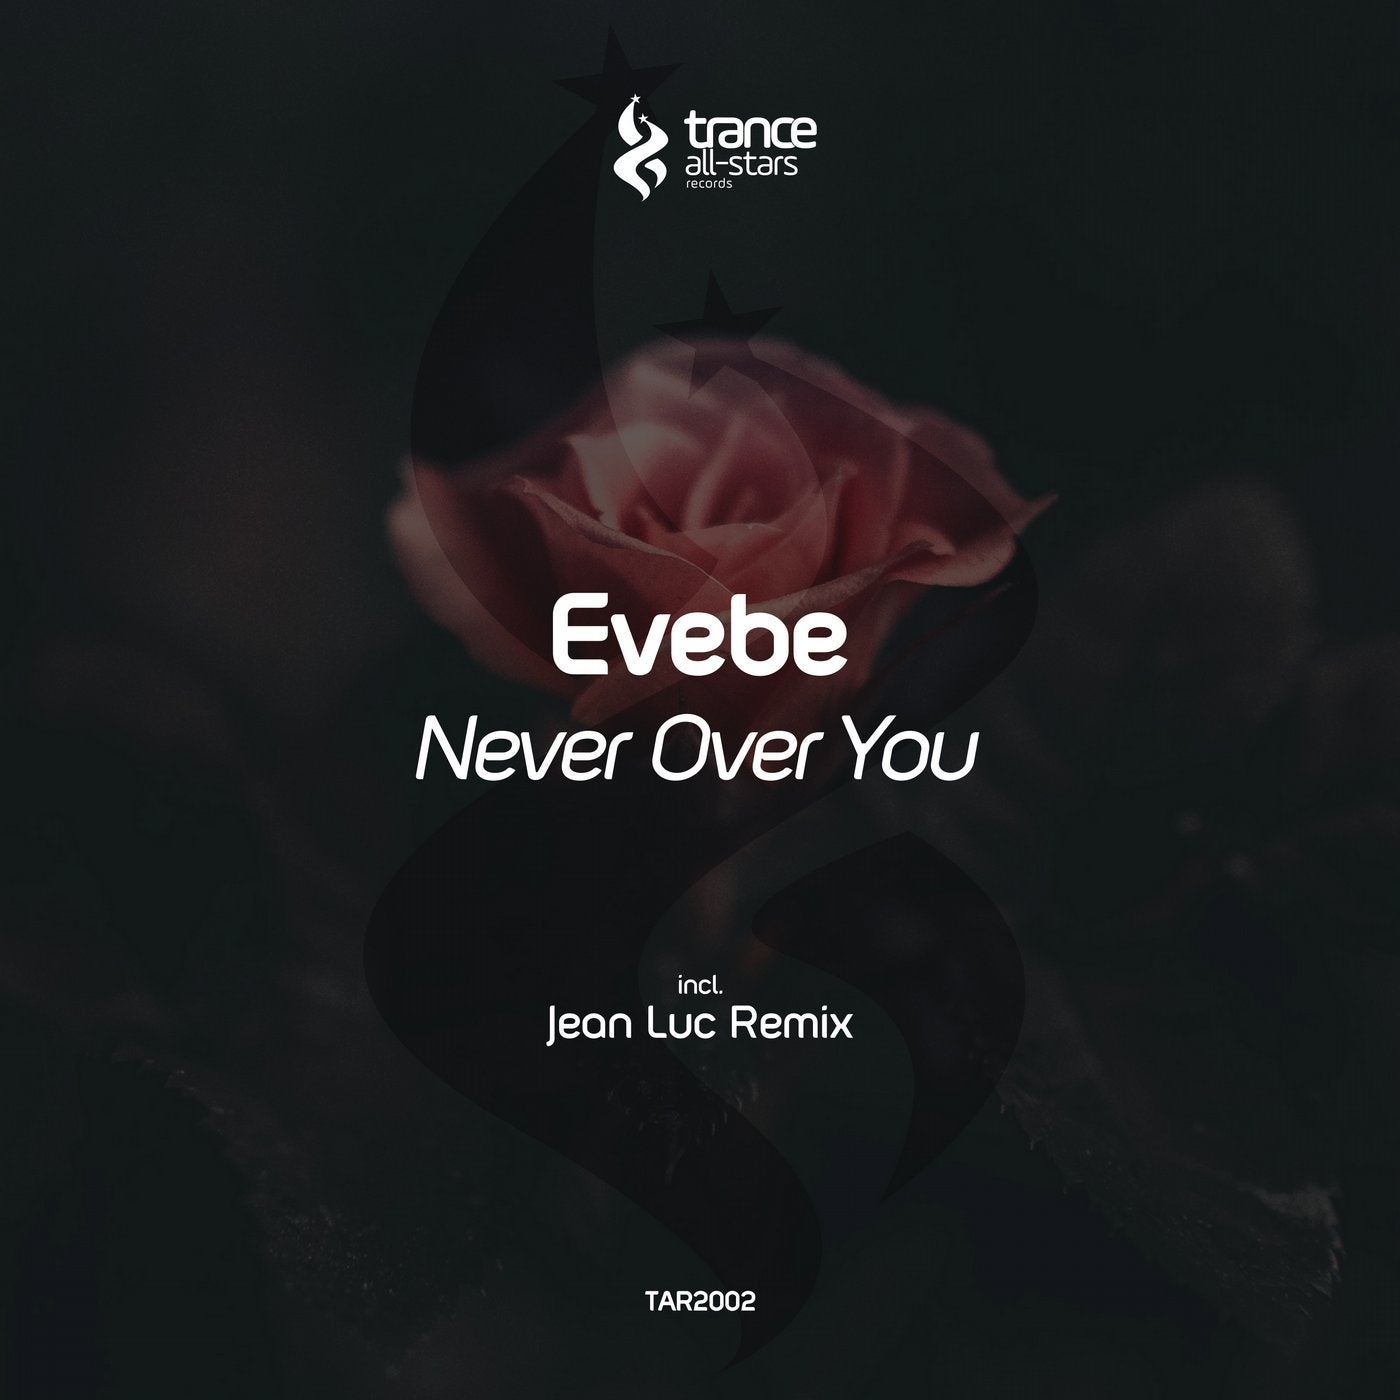 Never over You